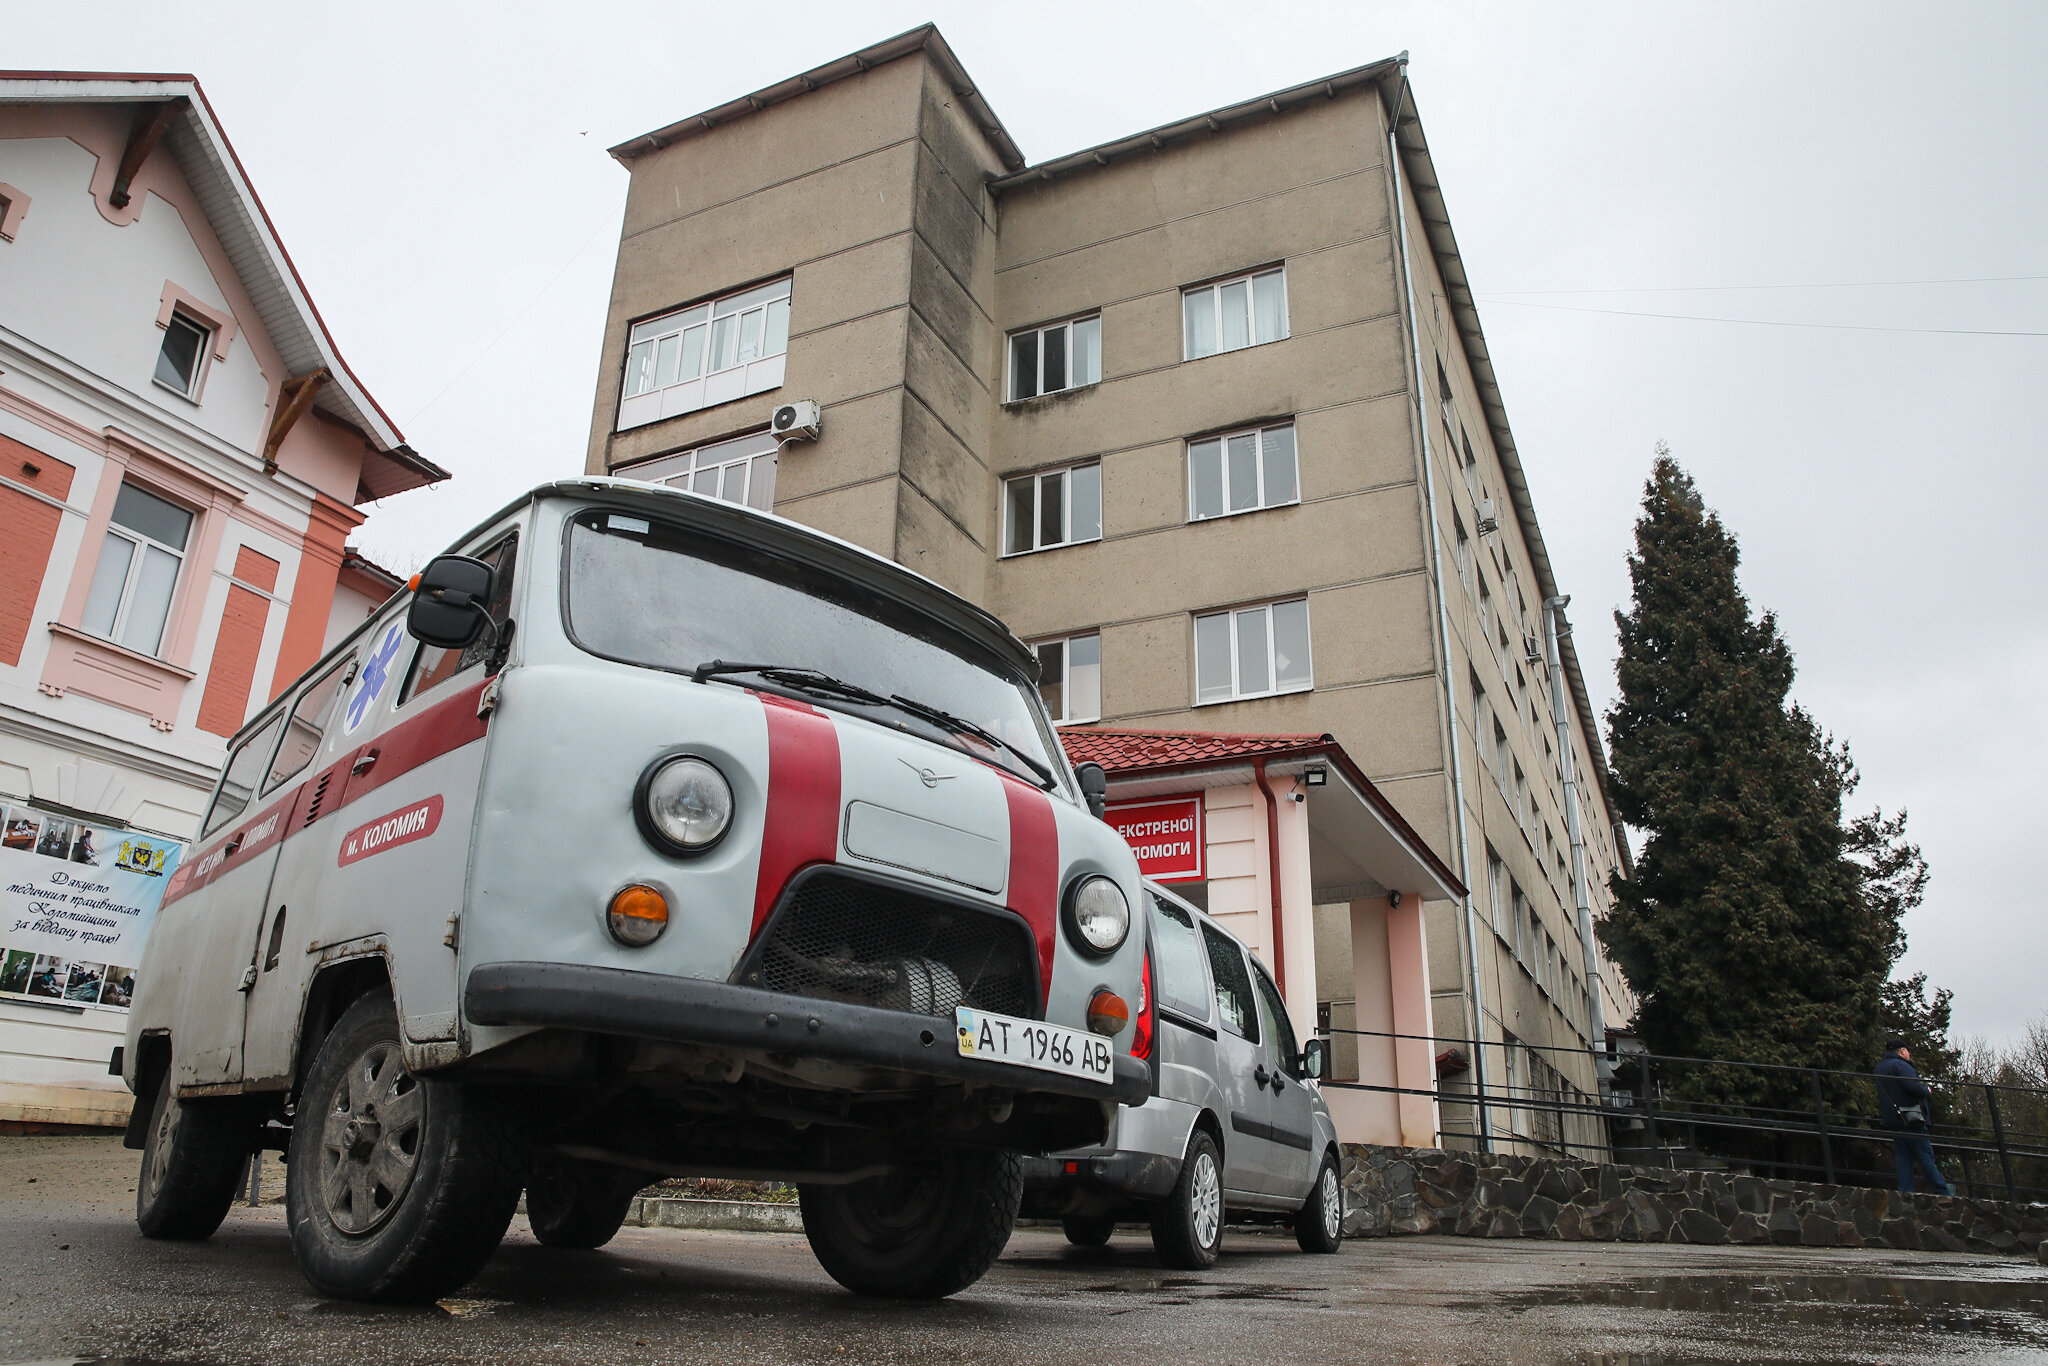 An ambulance is parked near the building of Kolomyia District Hospital in Ivano-Frankivsk Oblast on March 16, 2021.